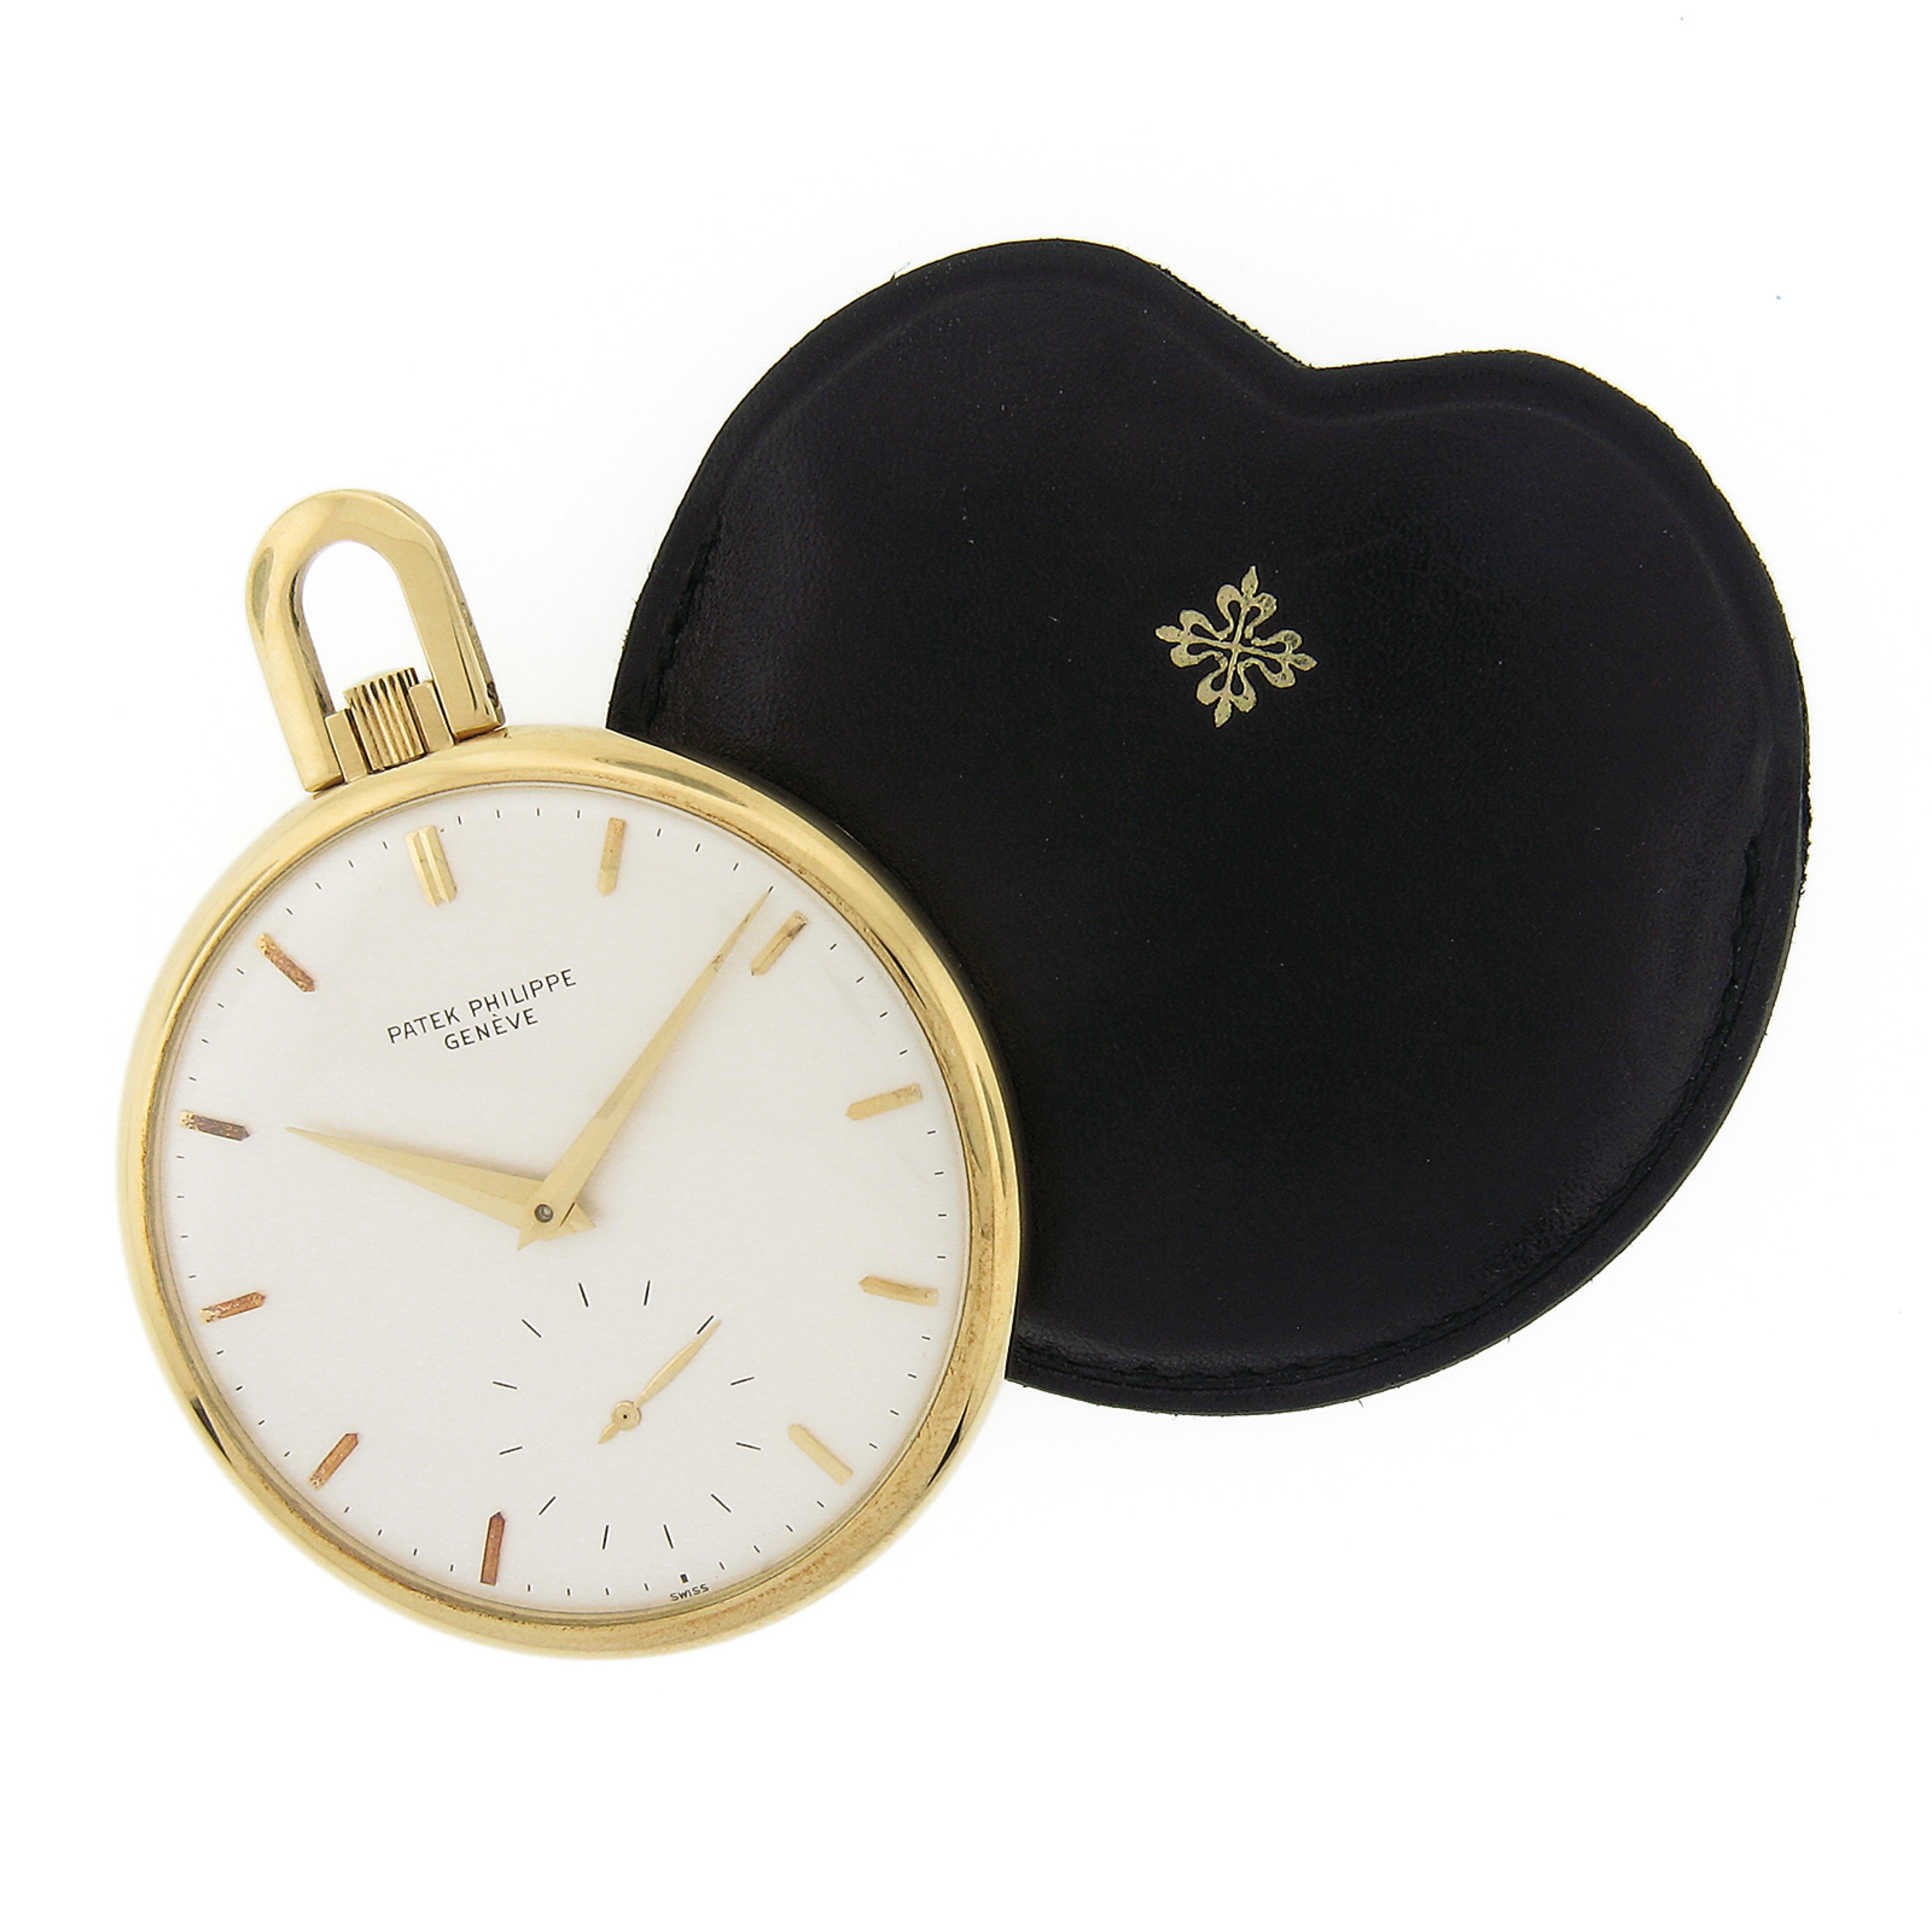 This super chic and classy Patek Philippe & Co. pocket watch features a solid 18k yellow gold open face case. The fine Swiss made 18 jewel calibe 17-170 movement winds, sets, and runs smoothly and keeps accurate time. The watch is personalized with